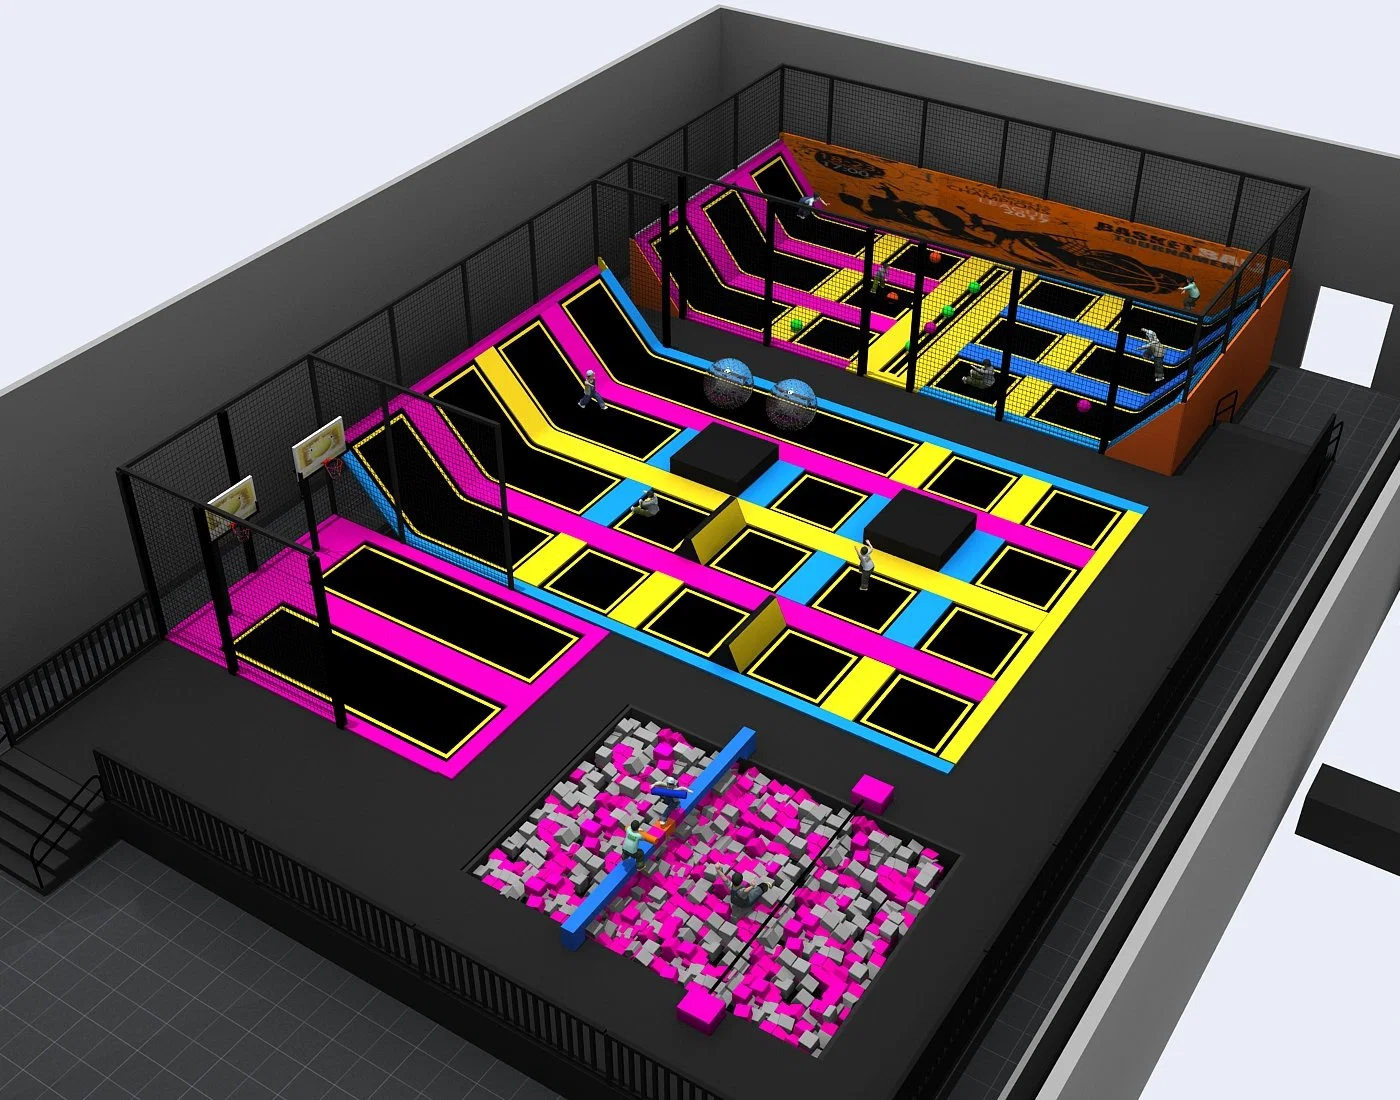 Custom Products Trampoline Park Play Area Indoor Playground